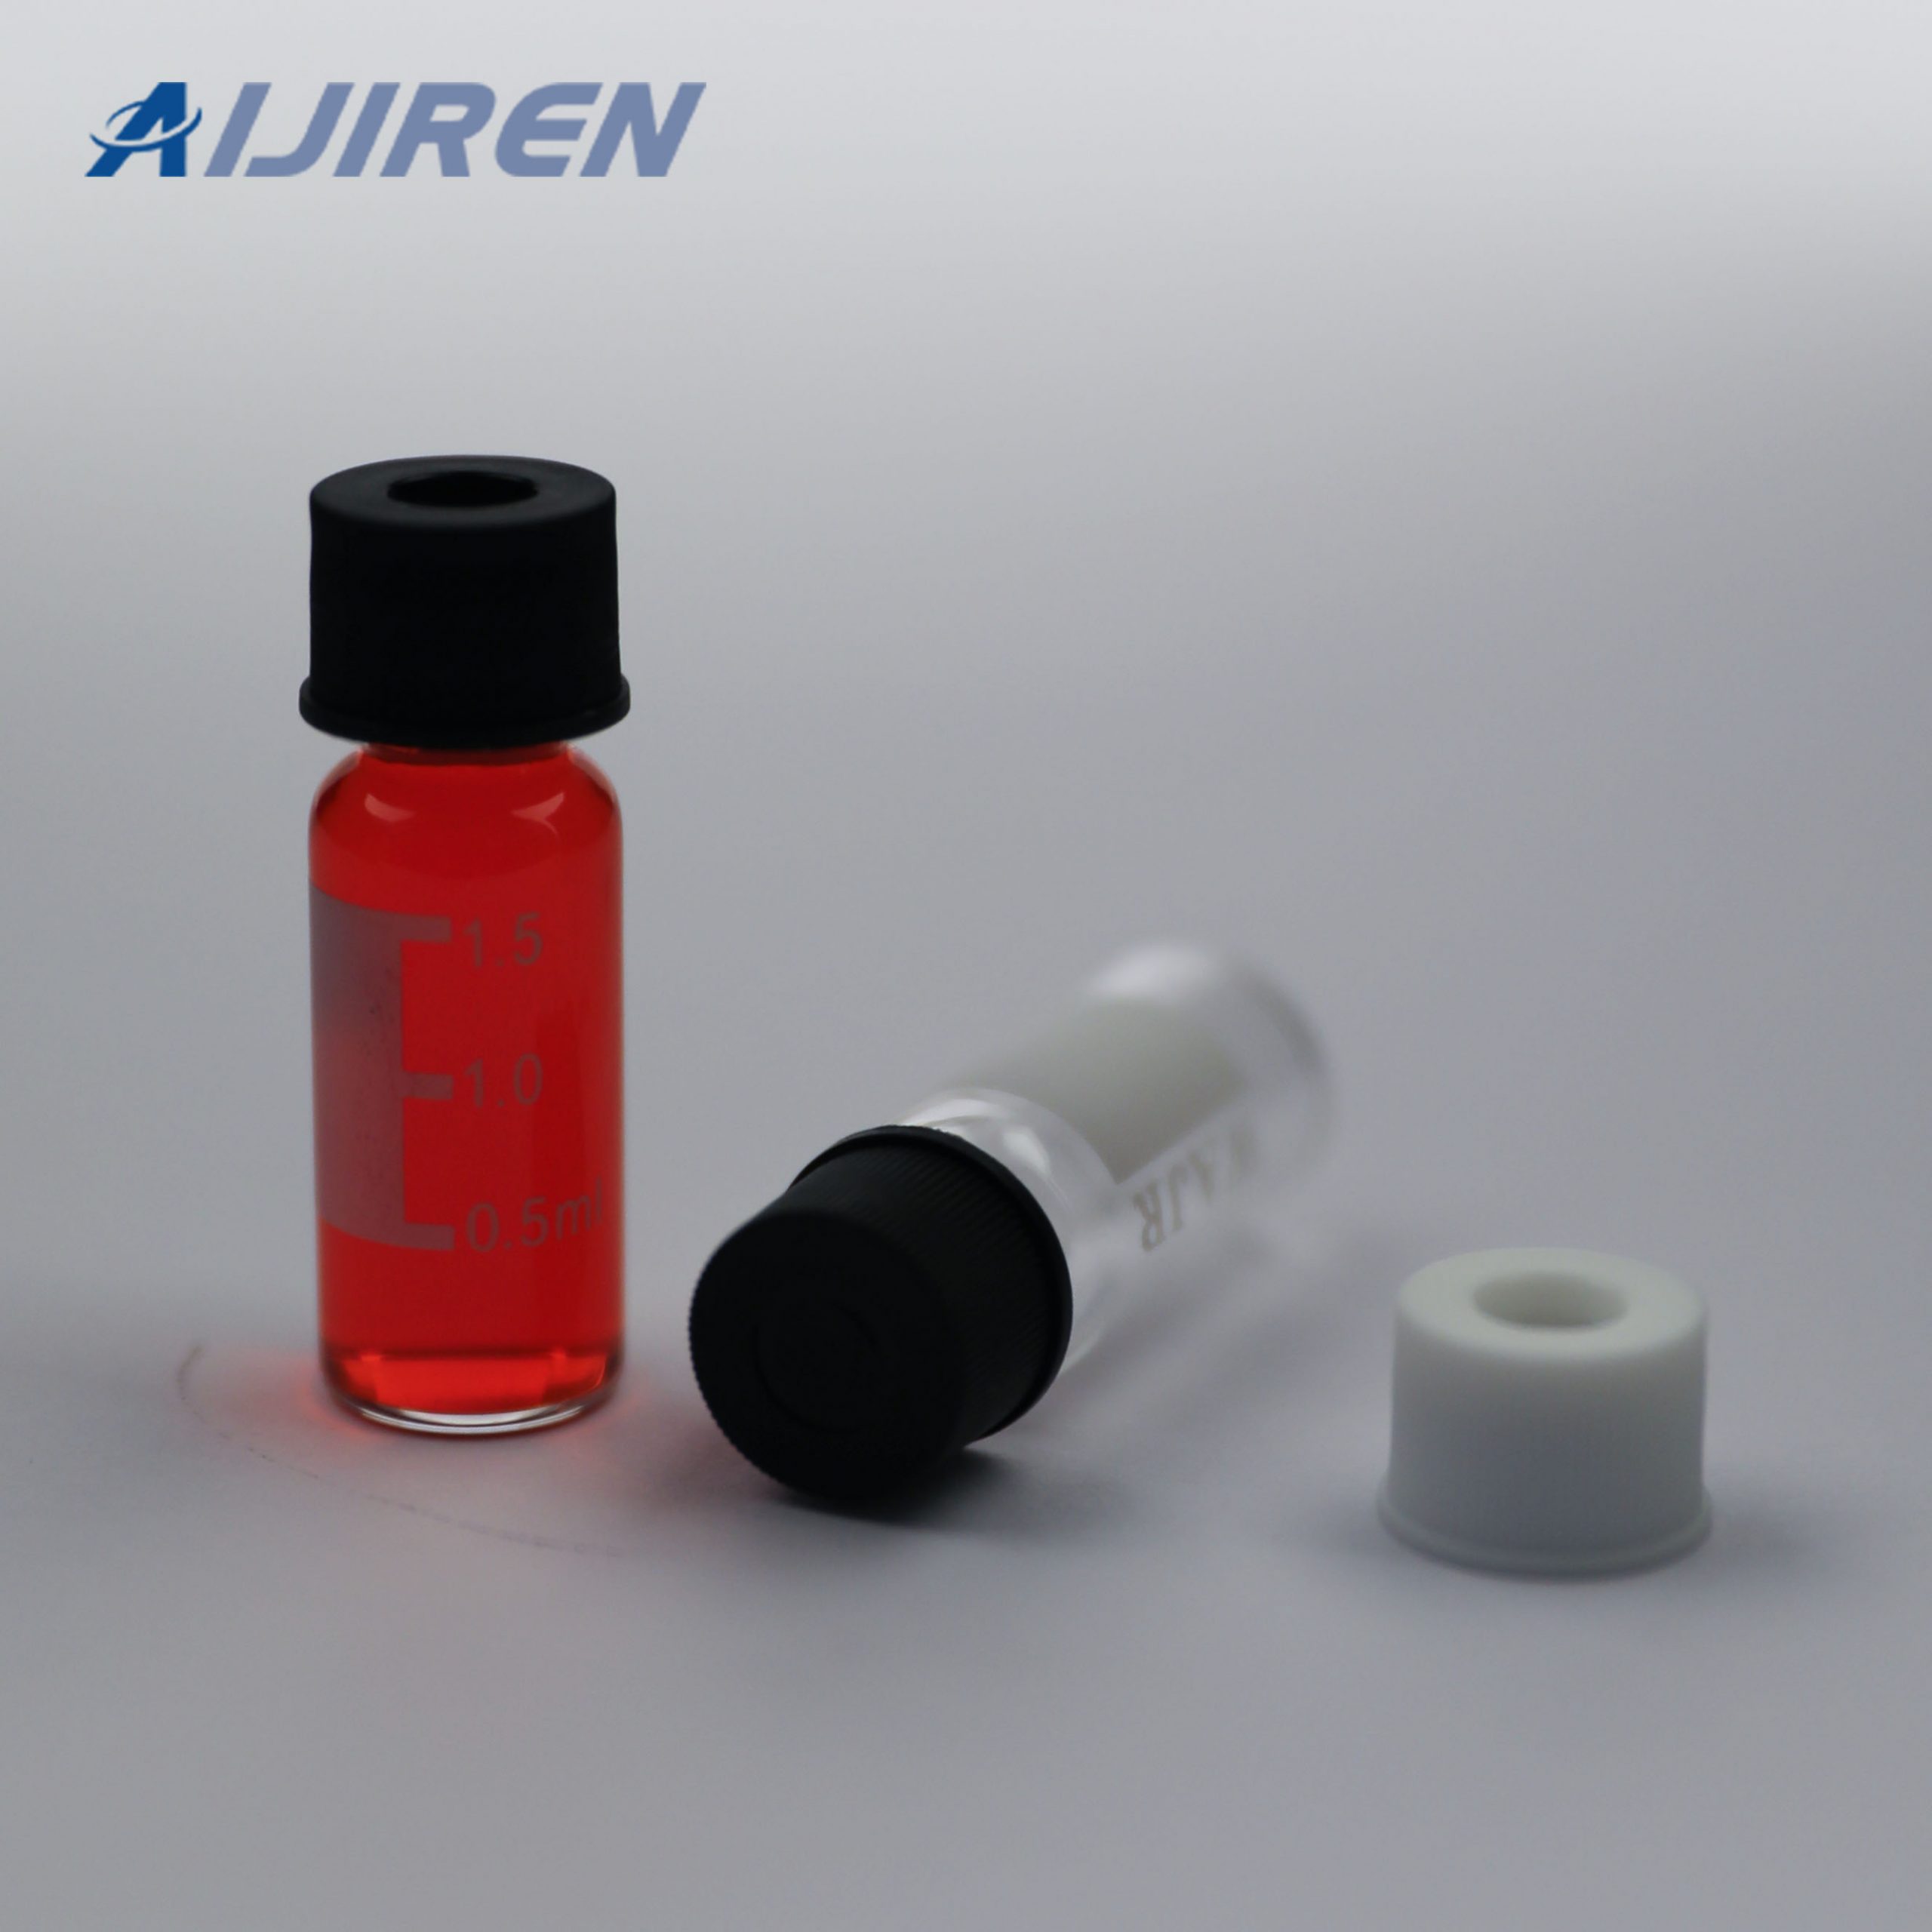 2ml 8mm Glass Vial with Label Area from Aijiren